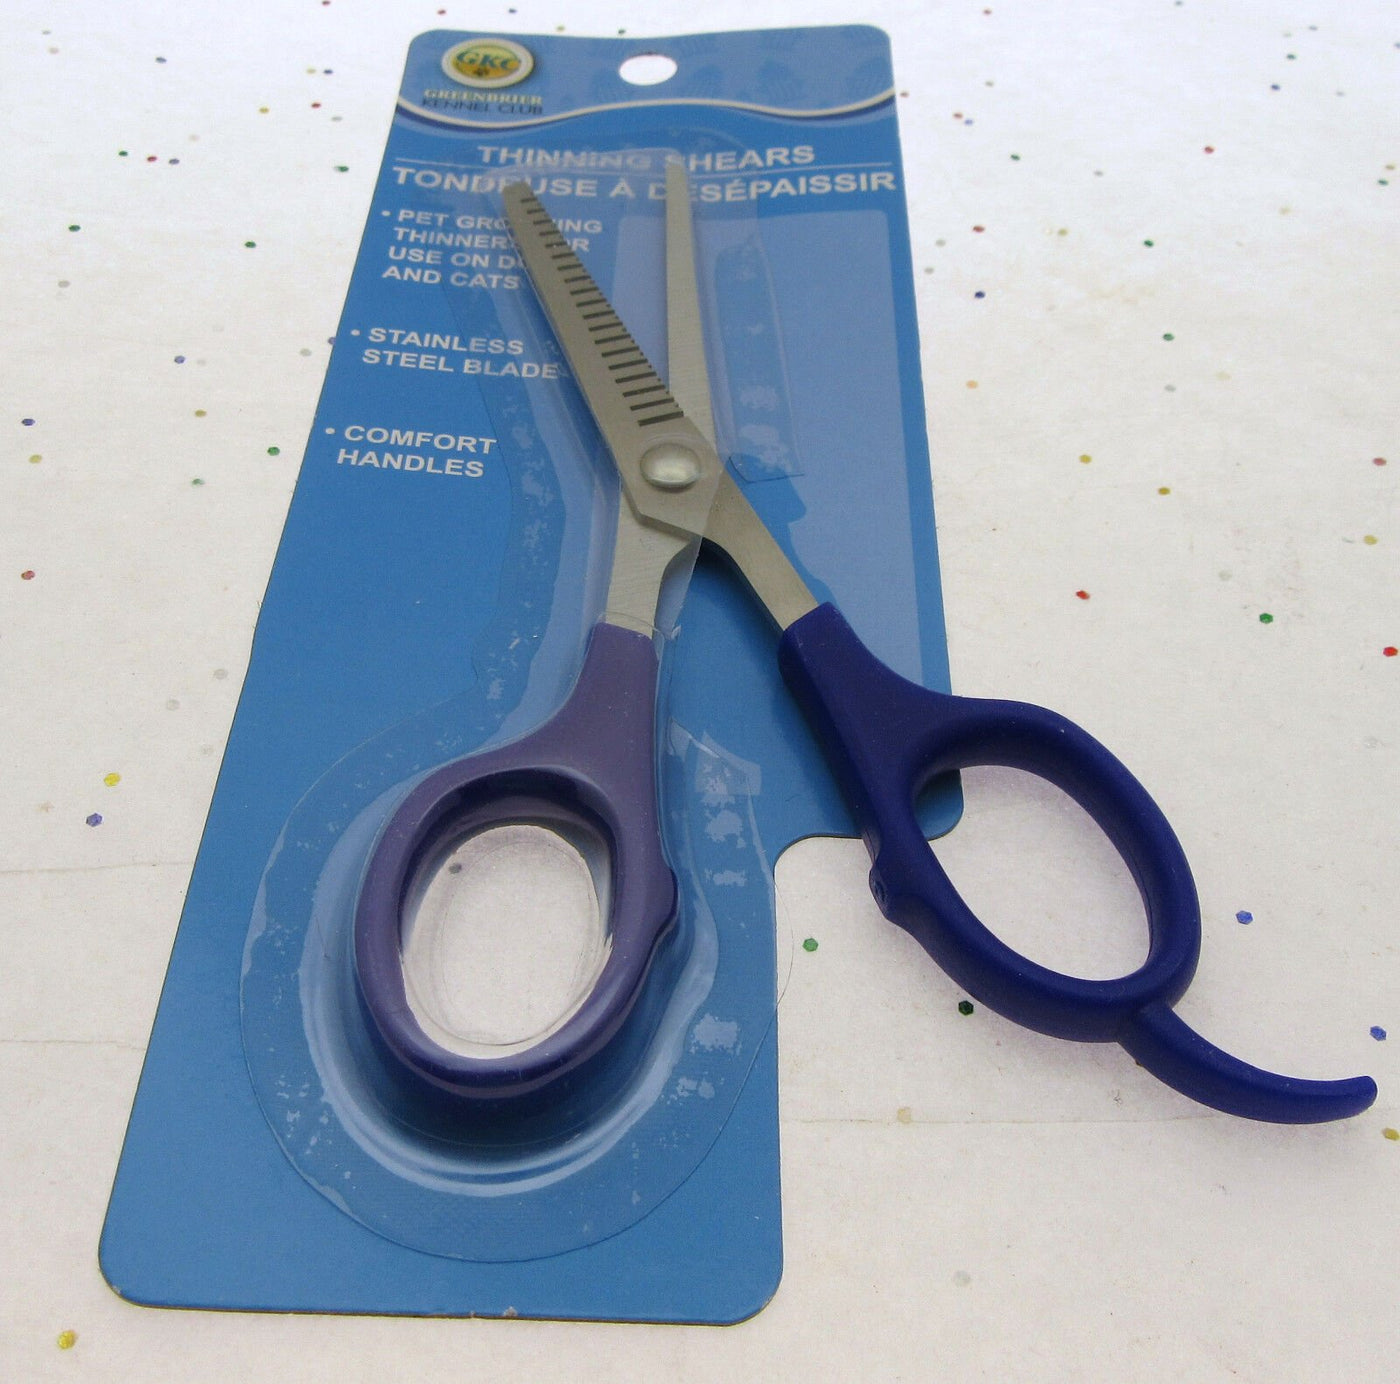 Dog Thinning Shears by Greenbrier Kennel Club Scissors ~ Pet Fur Grooming Care